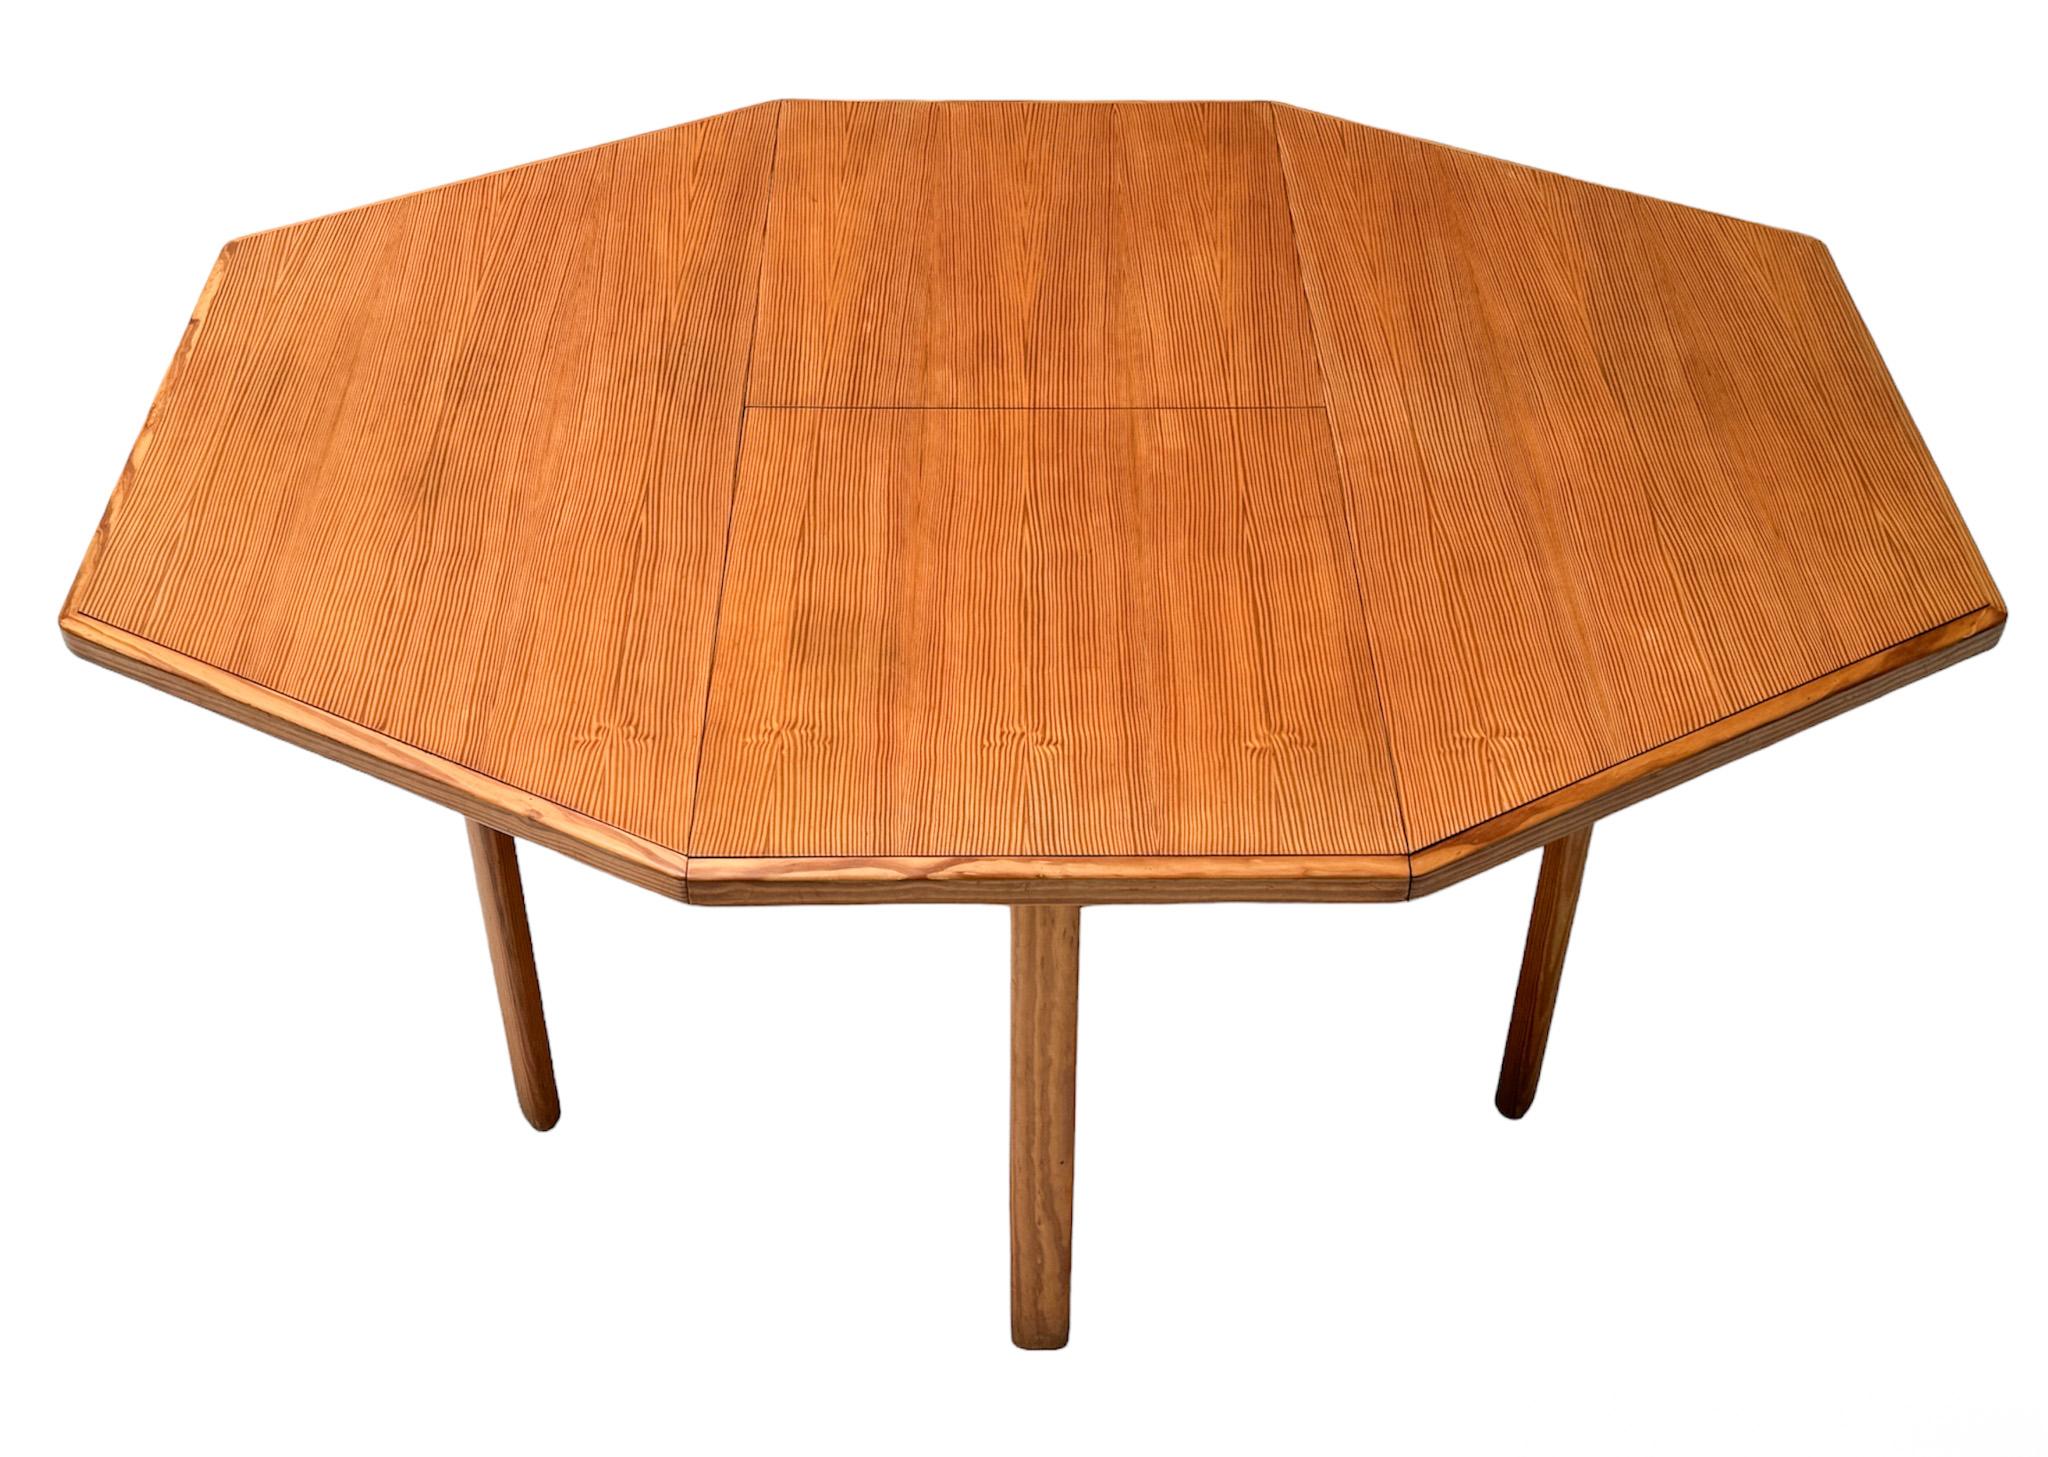 French Pine Mid-Century Modern Extendable Dining Room Table, 1970s For Sale 1